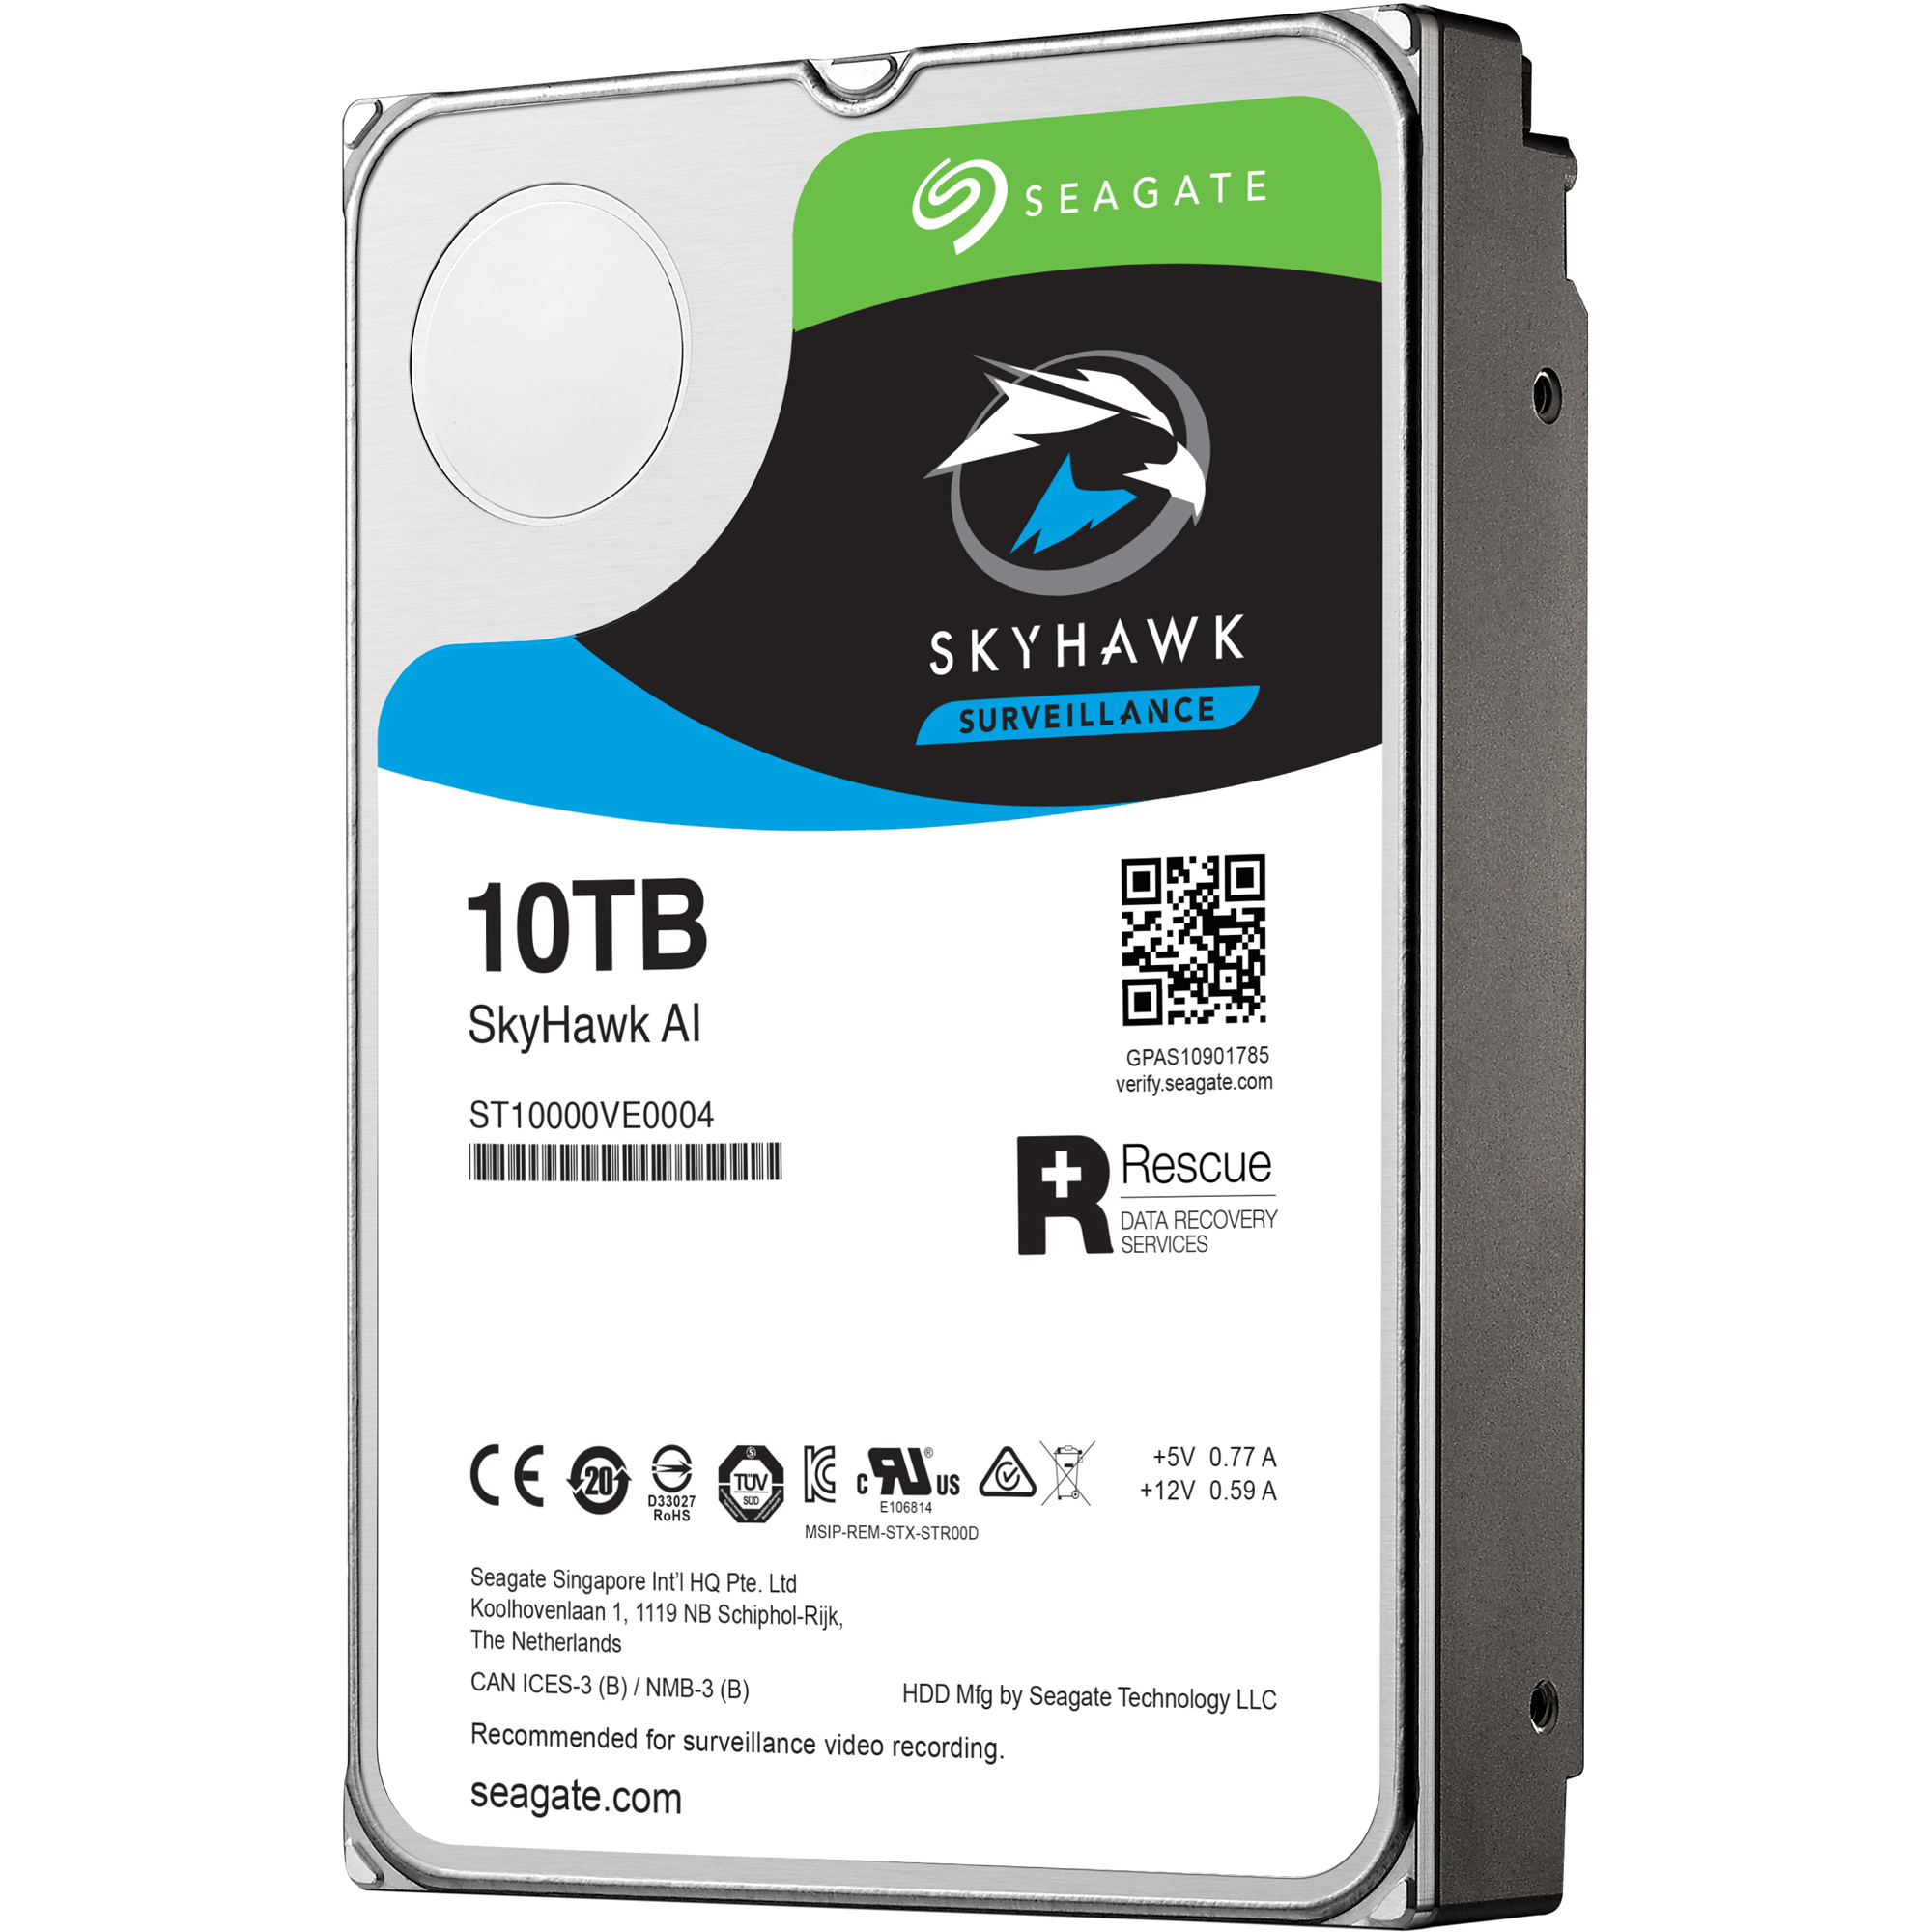 Seagate SkyHawk AI ST10000VE0004 - Hard drive - 10 TB - internal - 3.5" - SATA 6Gb/s - buffer: 256 MB - with Seagate Rescue Data Recovery - image 4 of 5